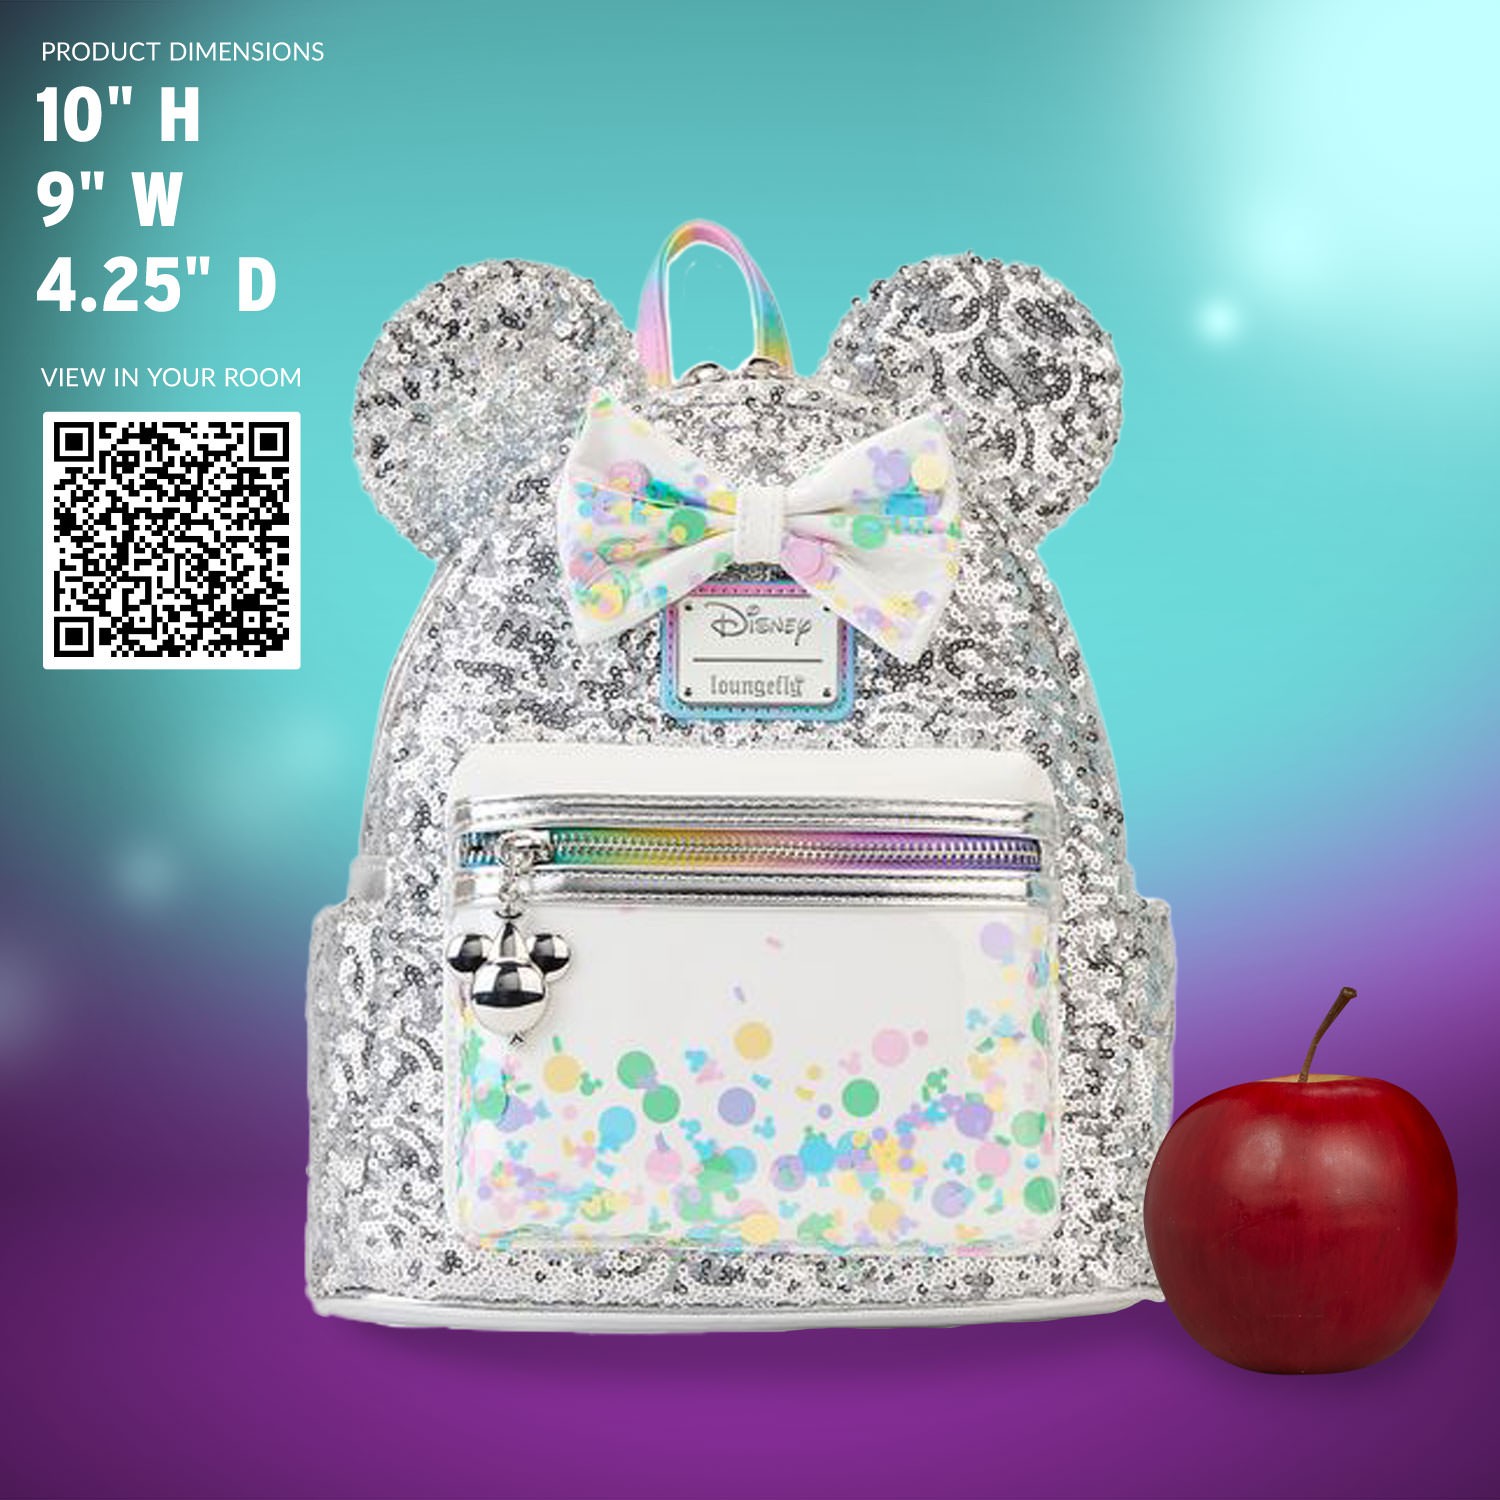 Loungefly Mini Backpack- Minnie Mouse Silver Sequin